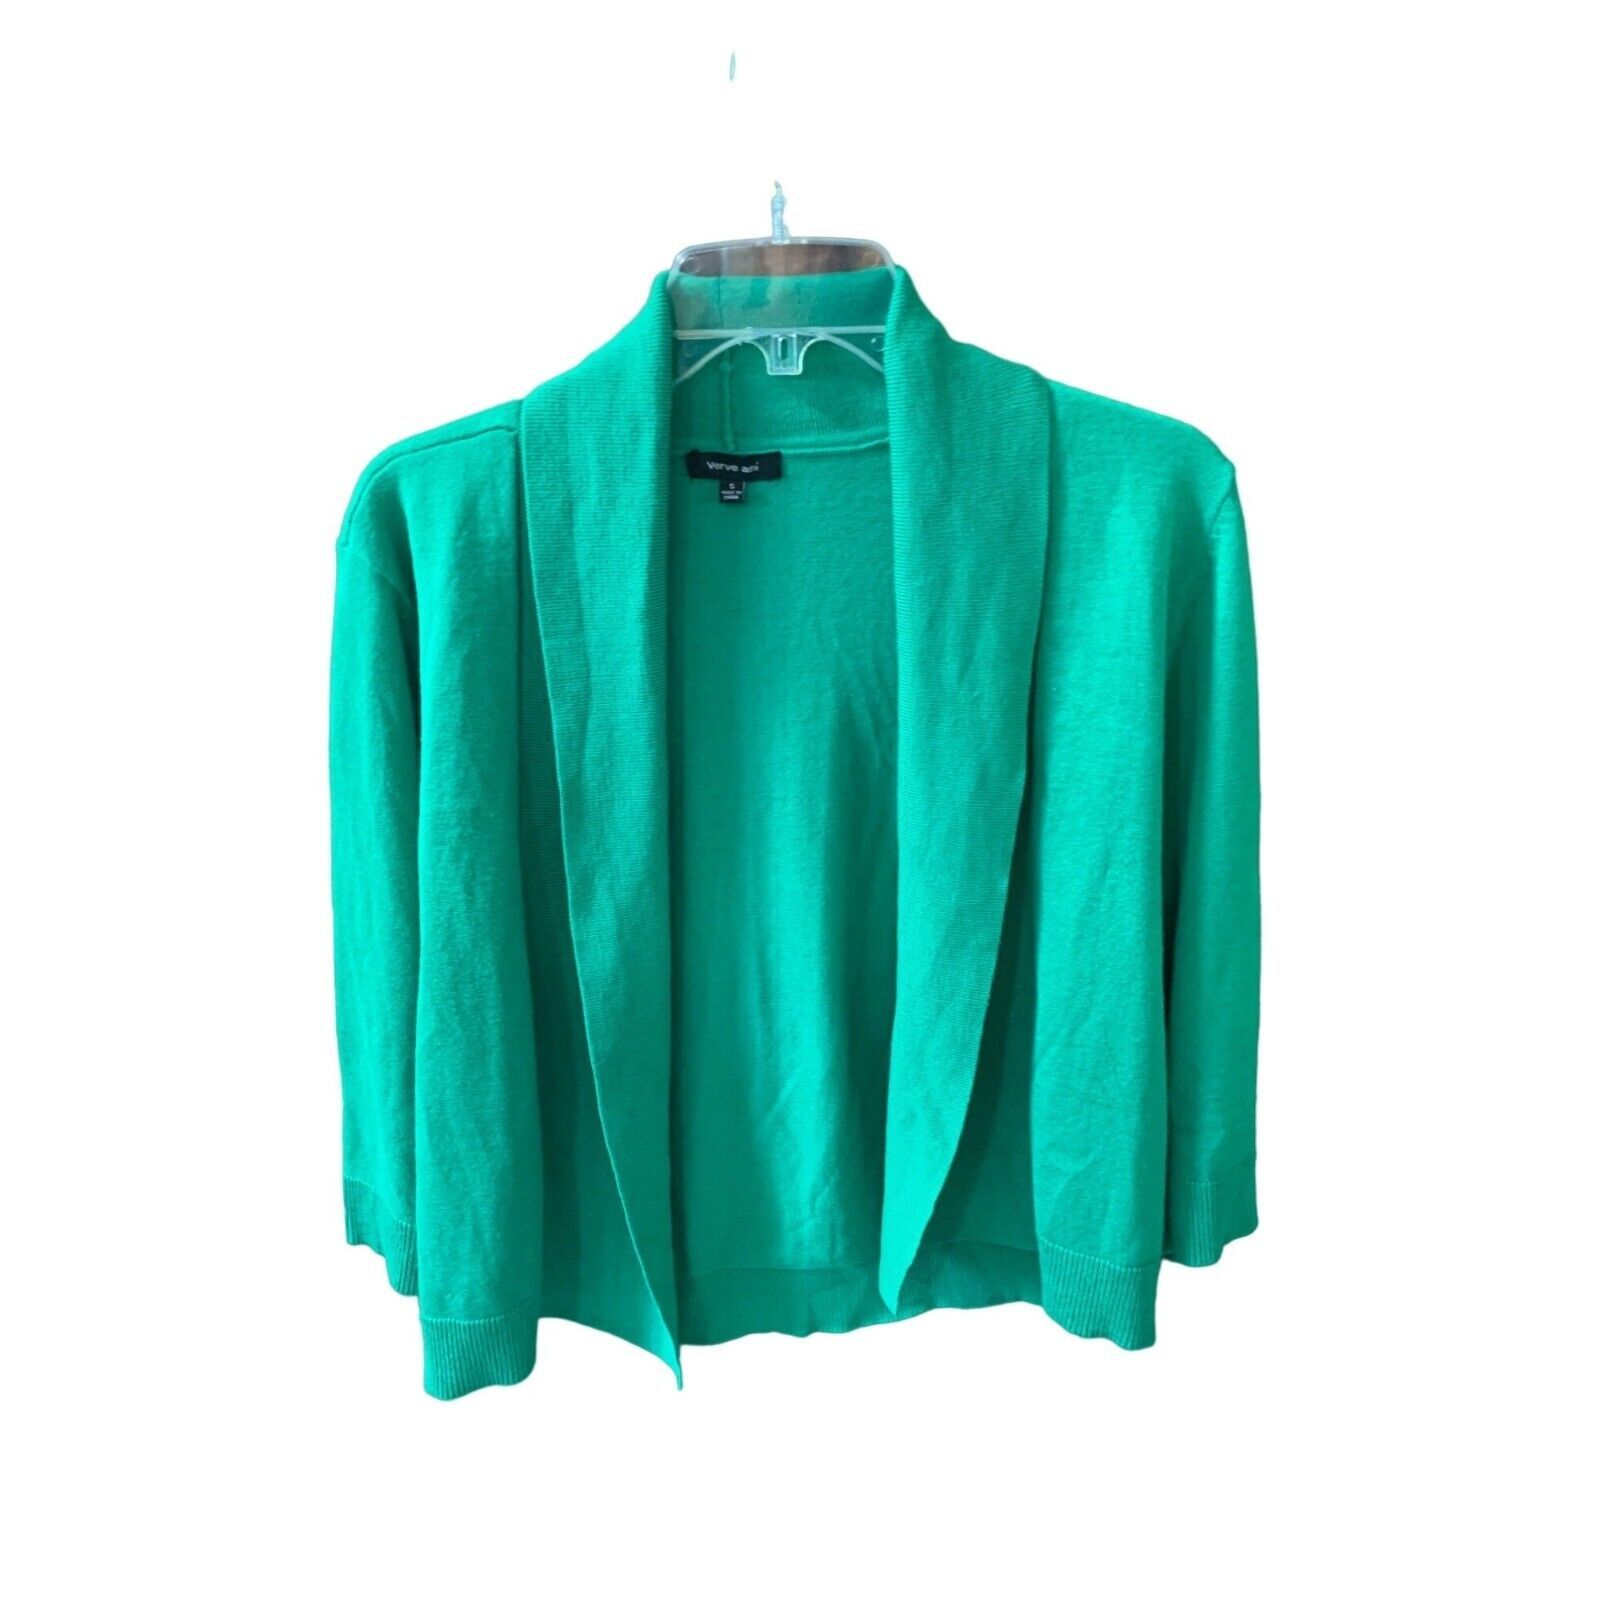 Primary image for Verve ami Womens Size Small Green Cardigan Open Front Sweater 3/4 sleeve LIghtwe